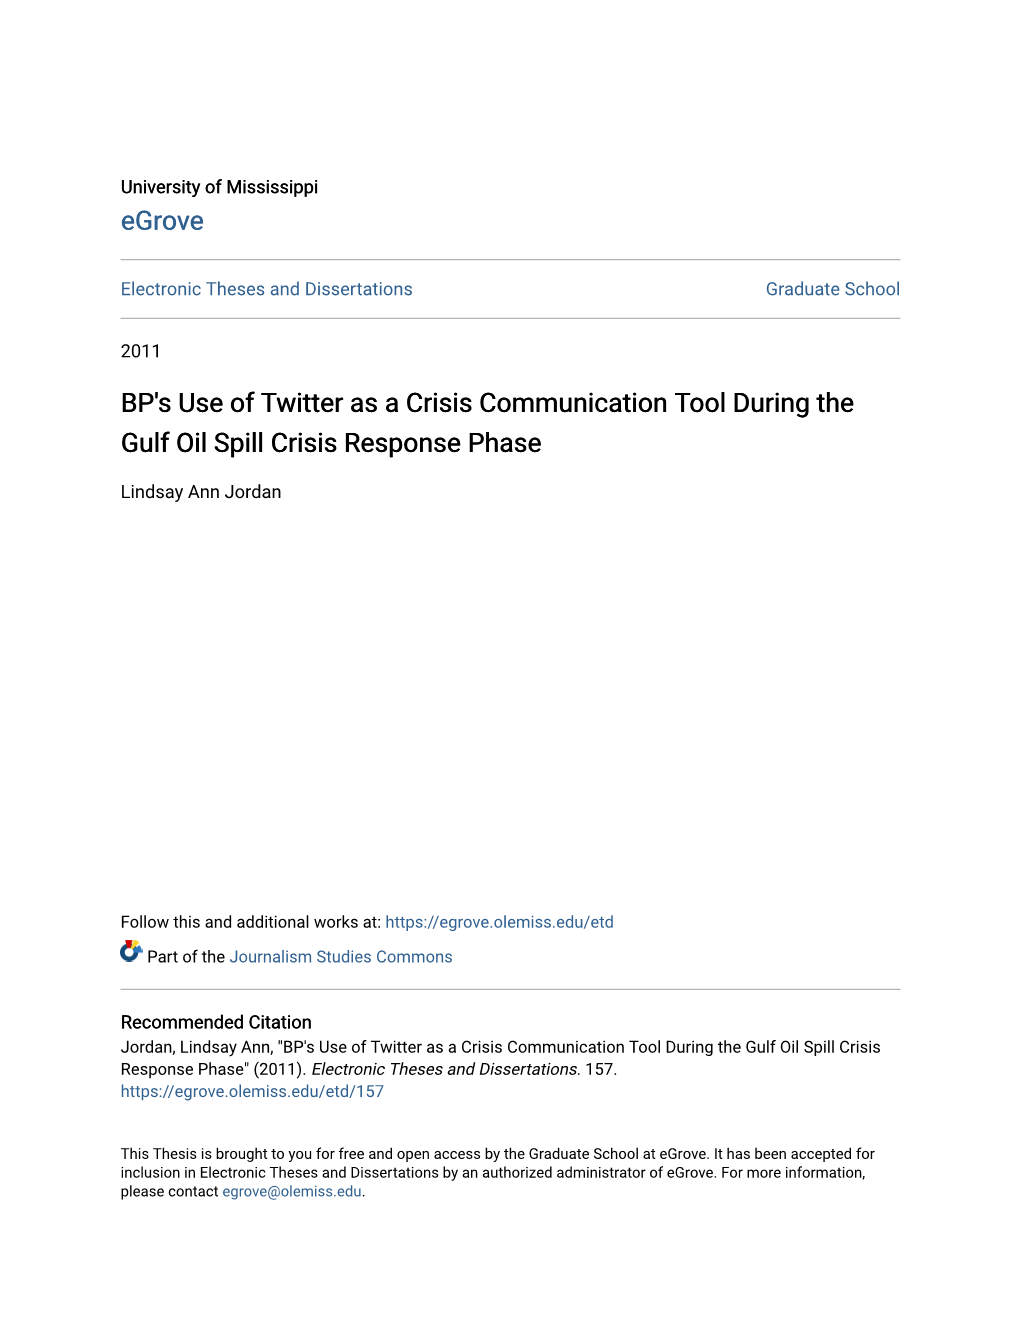 BP's Use of Twitter As a Crisis Communication Tool During the Gulf Oil Spill Crisis Response Phase